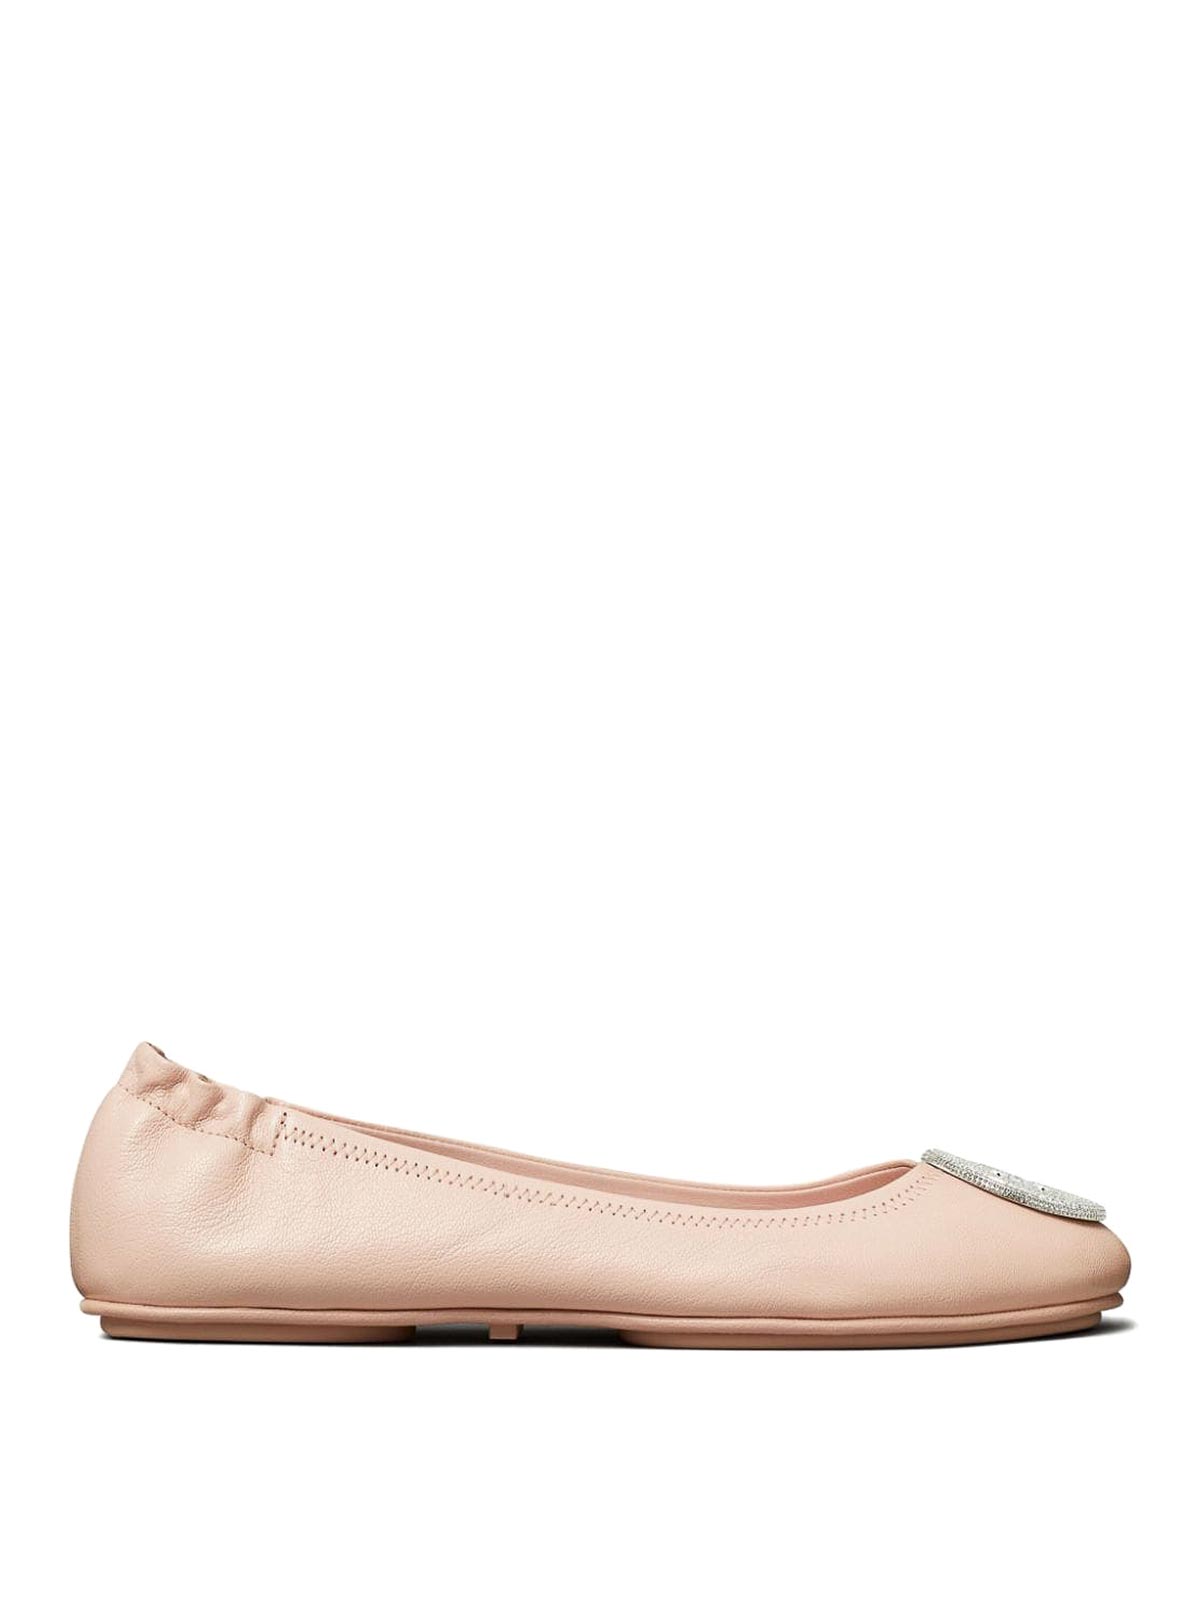 Tory Burch Minnie Leather Ballet Flats In Pink